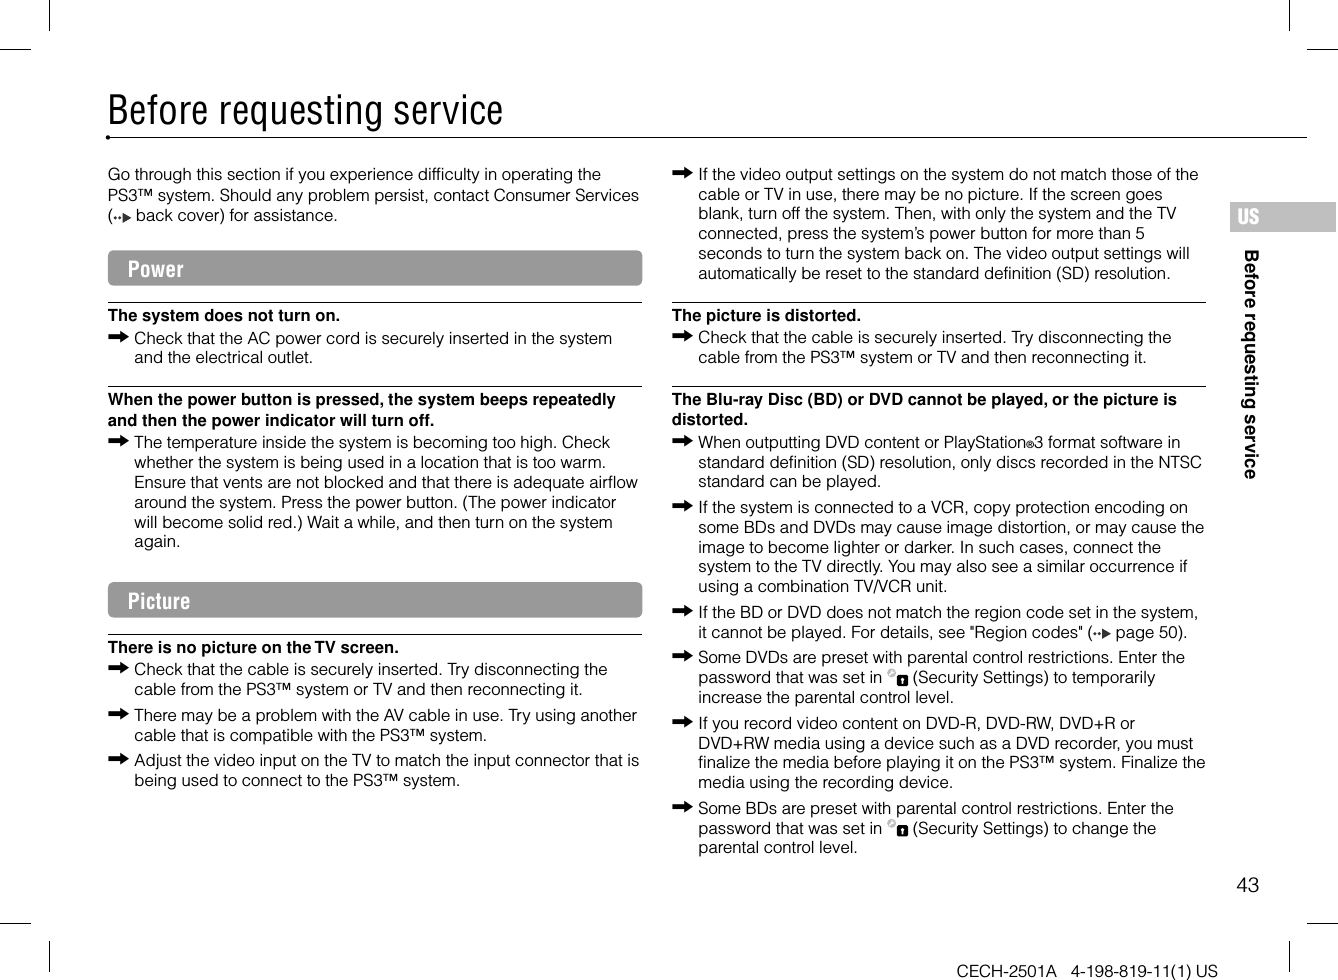 43Before requesting serviceCECH-2501A   4-198-819-11(1) USBefore requesting serviceUSGo through this section if you experience difficulty in operating the PS3™ system. Should any problem persist, contact Consumer Services (  back cover) for assistance.PowerThe system does not turn on.Check that the AC power cord is securely inserted in the system and the electrical outlet.When the power button is pressed, the system beeps repeatedly and then the power indicator will turn off.The temperature inside the system is becoming too high. Check whether the system is being used in a location that is too warm. Ensure that vents are not blocked and that there is adequate airflow around the system. Press the power button. (The power indicator will become solid red.) Wait a while, and then turn on the system again.PictureThere is no picture on the TV screen.Check that the cable is securely inserted. Try disconnecting the cable from the PS3™ system or TV and then reconnecting it.There may be a problem with the AV cable in use. Try using another cable that is compatible with the PS3™ system.Adjust the video input on the TV to match the input connector that is being used to connect to the PS3™ system.If the video output settings on the system do not match those of the cable or TV in use, there may be no picture. If the screen goes blank, turn off the system. Then, with only the system and the TV connected, press the system’s power button for more than 5 seconds to turn the system back on. The video output settings will automatically be reset to the standard definition (SD) resolution.The picture is distorted.Check that the cable is securely inserted. Try disconnecting the cable from the PS3™ system or TV and then reconnecting it.The Blu-ray Disc (BD) or DVD cannot be played, or the picture is distorted.When outputting DVD content or PlayStation®3 format software in standard definition (SD) resolution, only discs recorded in the NTSC standard can be played.If the system is connected to a VCR, copy protection encoding on some BDs and DVDs may cause image distortion, or may cause the image to become lighter or darker. In such cases, connect the system to the TV directly. You may also see a similar occurrence if using a combination TV/VCR unit.If the BD or DVD does not match the region code set in the system, it cannot be played. For details, see &quot;Region codes&quot; (  page 50).Some DVDs are preset with parental control restrictions. Enter the password that was set in   (Security Settings) to temporarily increase the parental control level.If you record video content on DVD-R, DVD-RW, DVD+R or DVD+RW media using a device such as a DVD recorder, you must finalize the media before playing it on the PS3™ system. Finalize the media using the recording device.Some BDs are preset with parental control restrictions. Enter the password that was set in   (Security Settings) to change the parental control level.